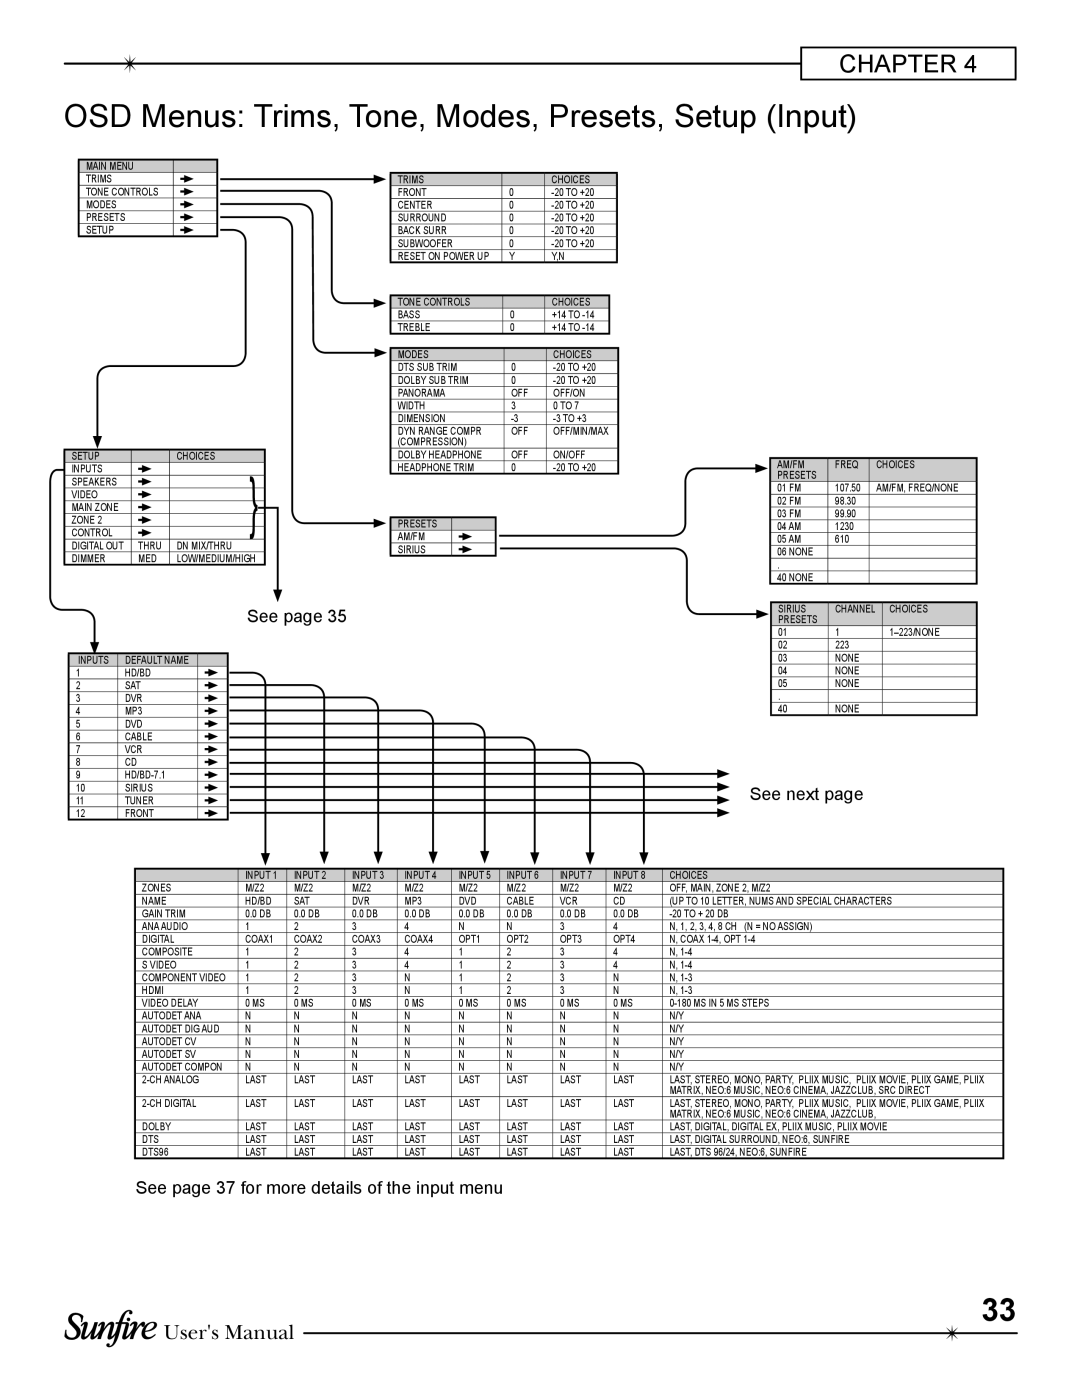 Sunfire TGR-401-230 manual Users Manual, See next page, See page 37 for more details of the input menu 